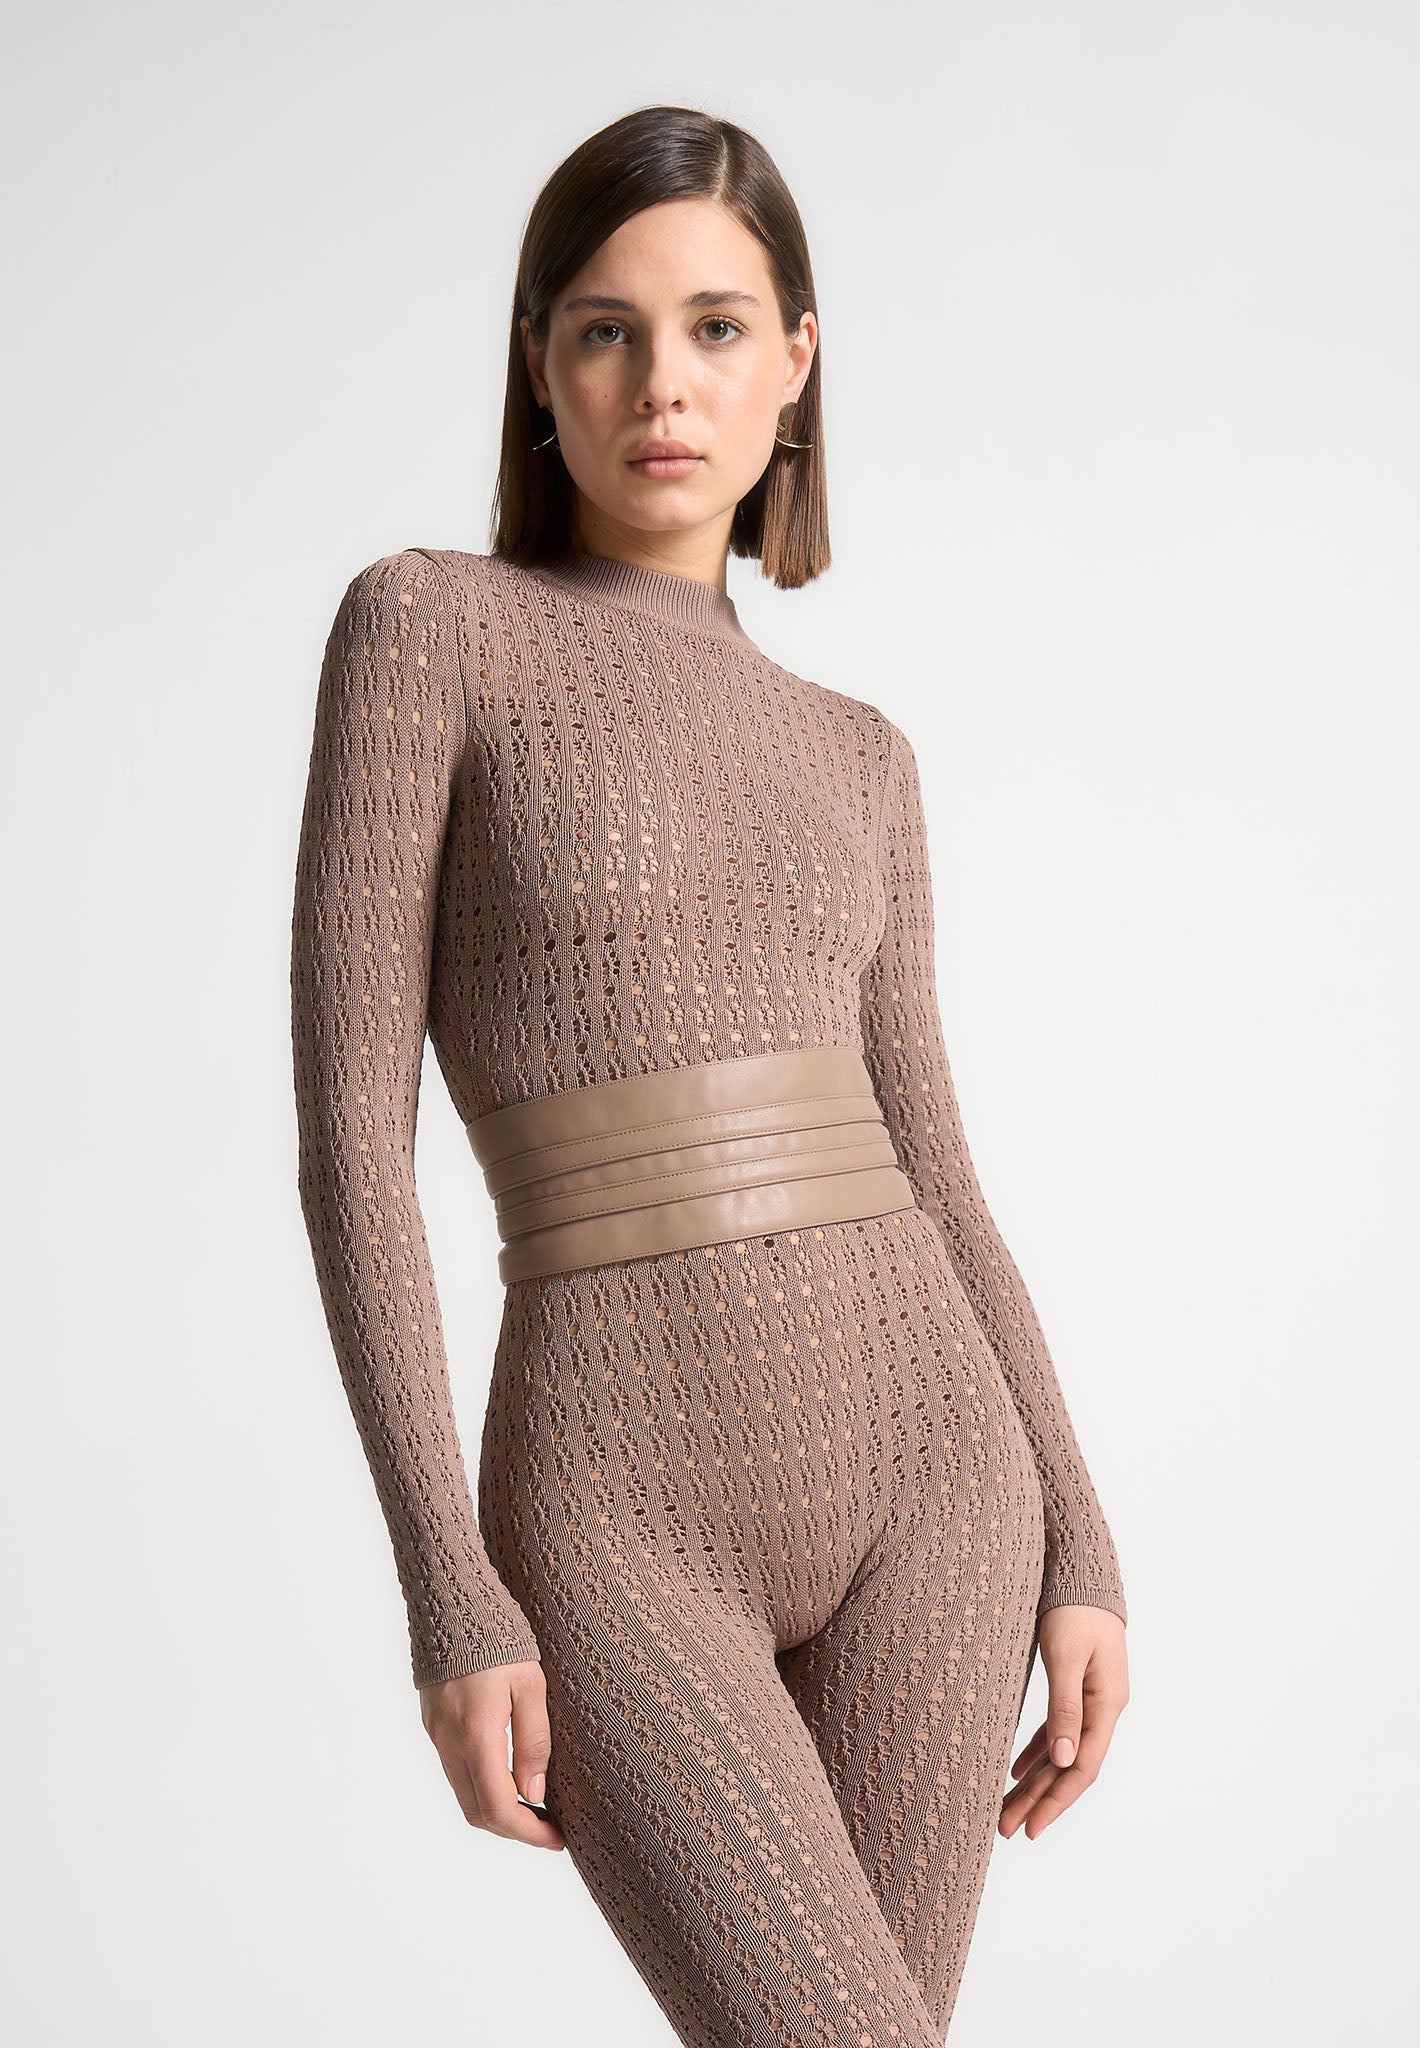 pointelle-knit-long-sleeve-jumpsuit-with-belt-taupe